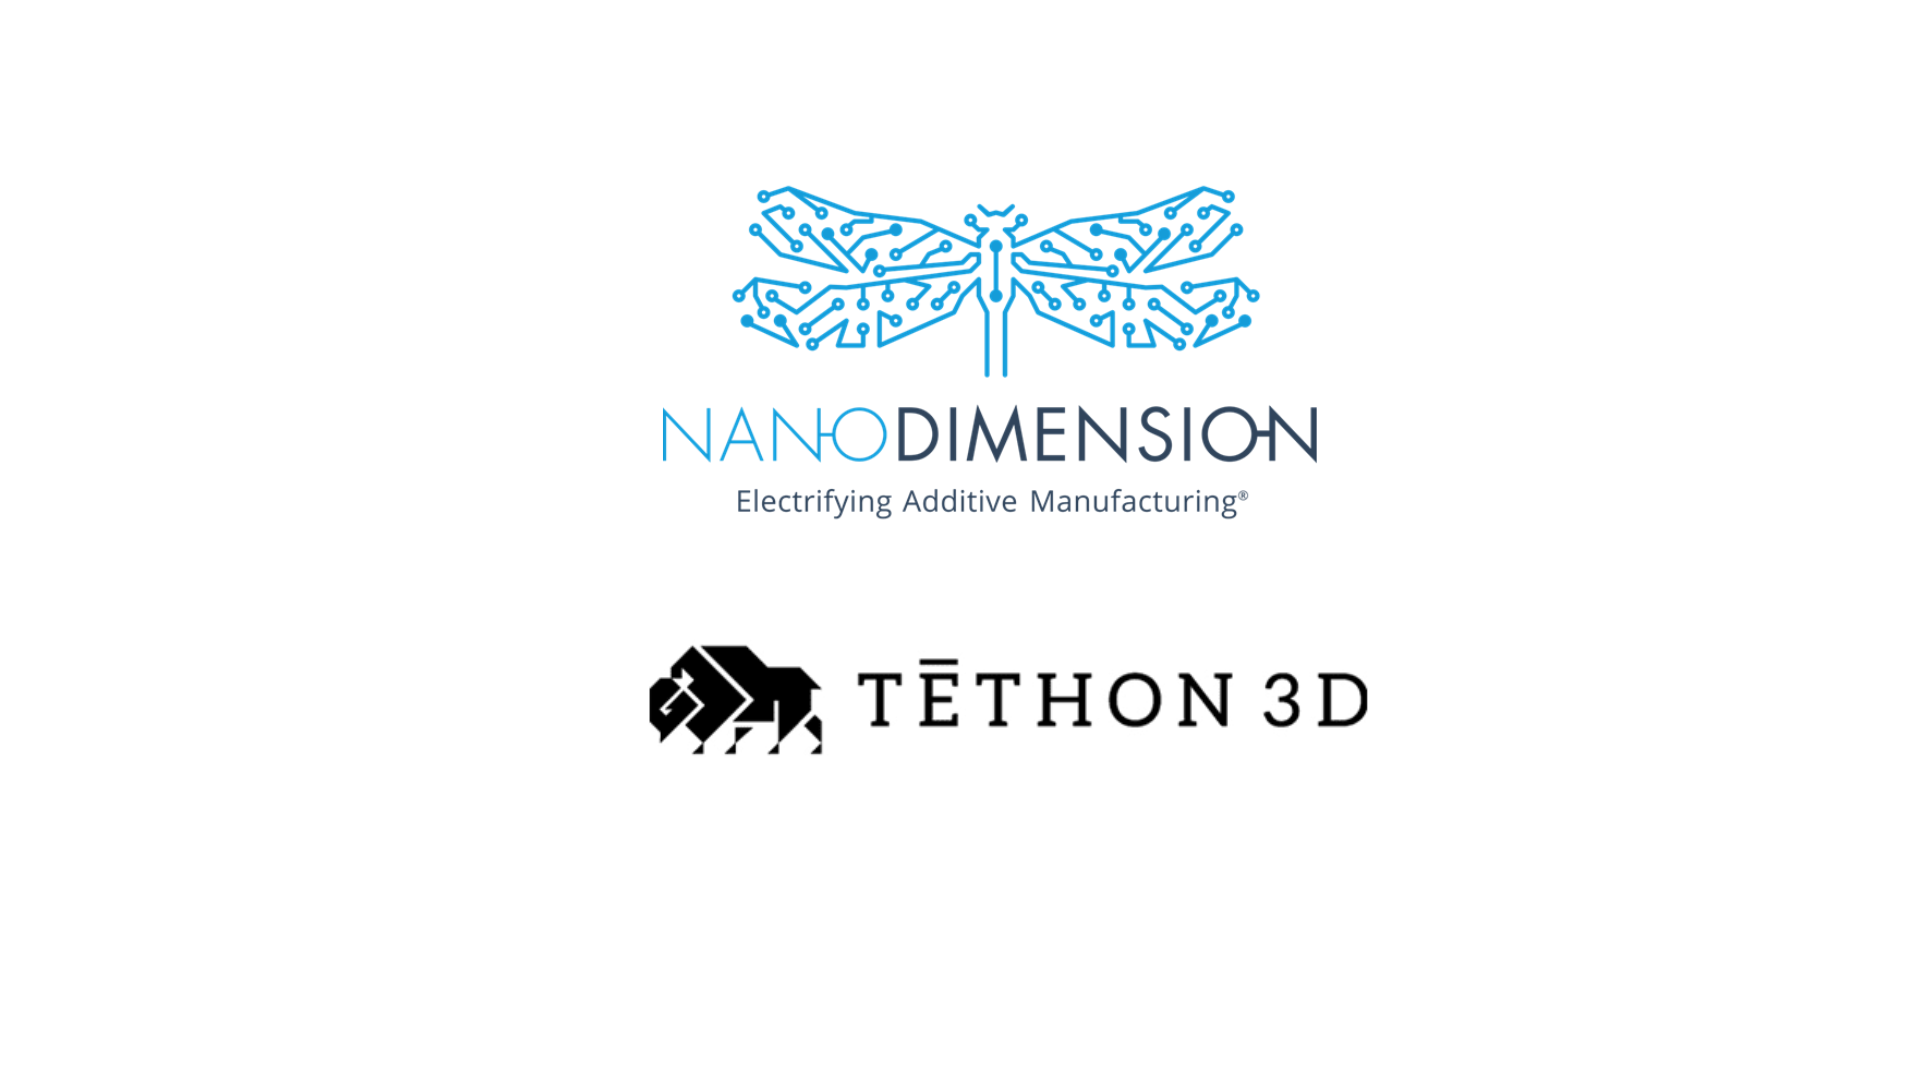 Nano Dimension has signed an agreement with Tethon 3D to develop new materials for its Fabrica 2.0 micro additive manufacturing system.